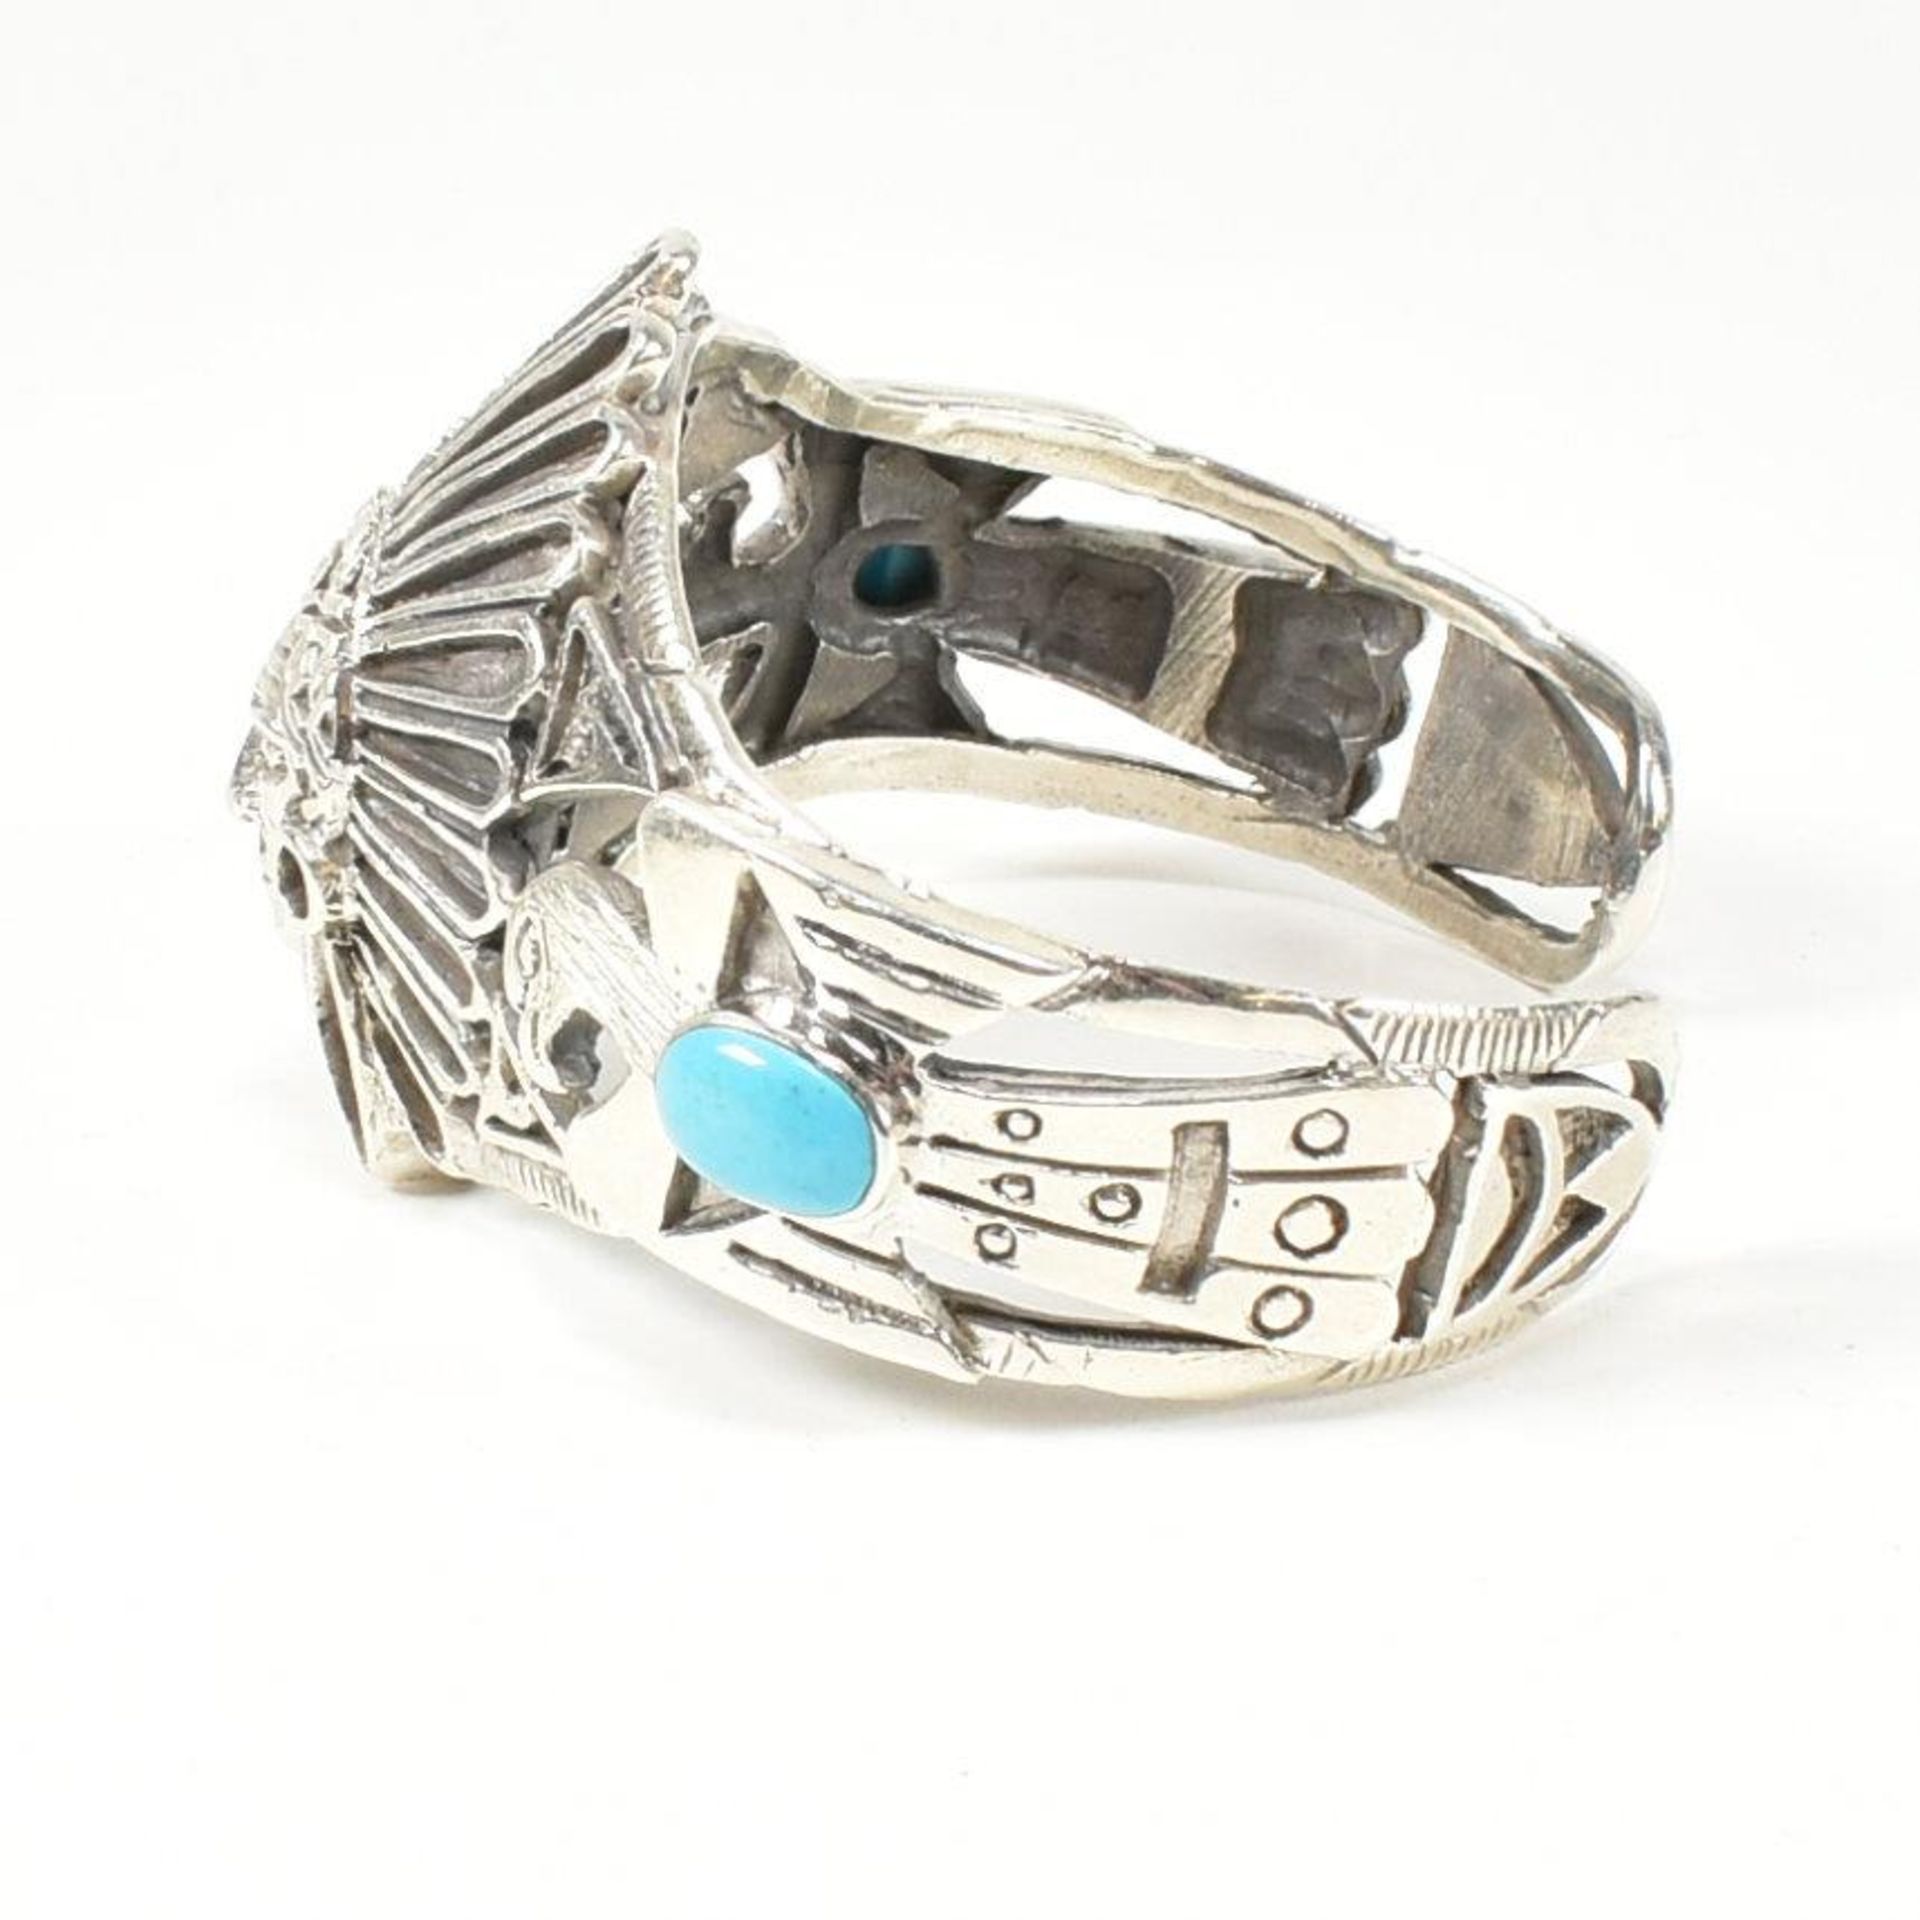 925 SILVER & TURQUOISE CUFF BANGLE - Image 3 of 5